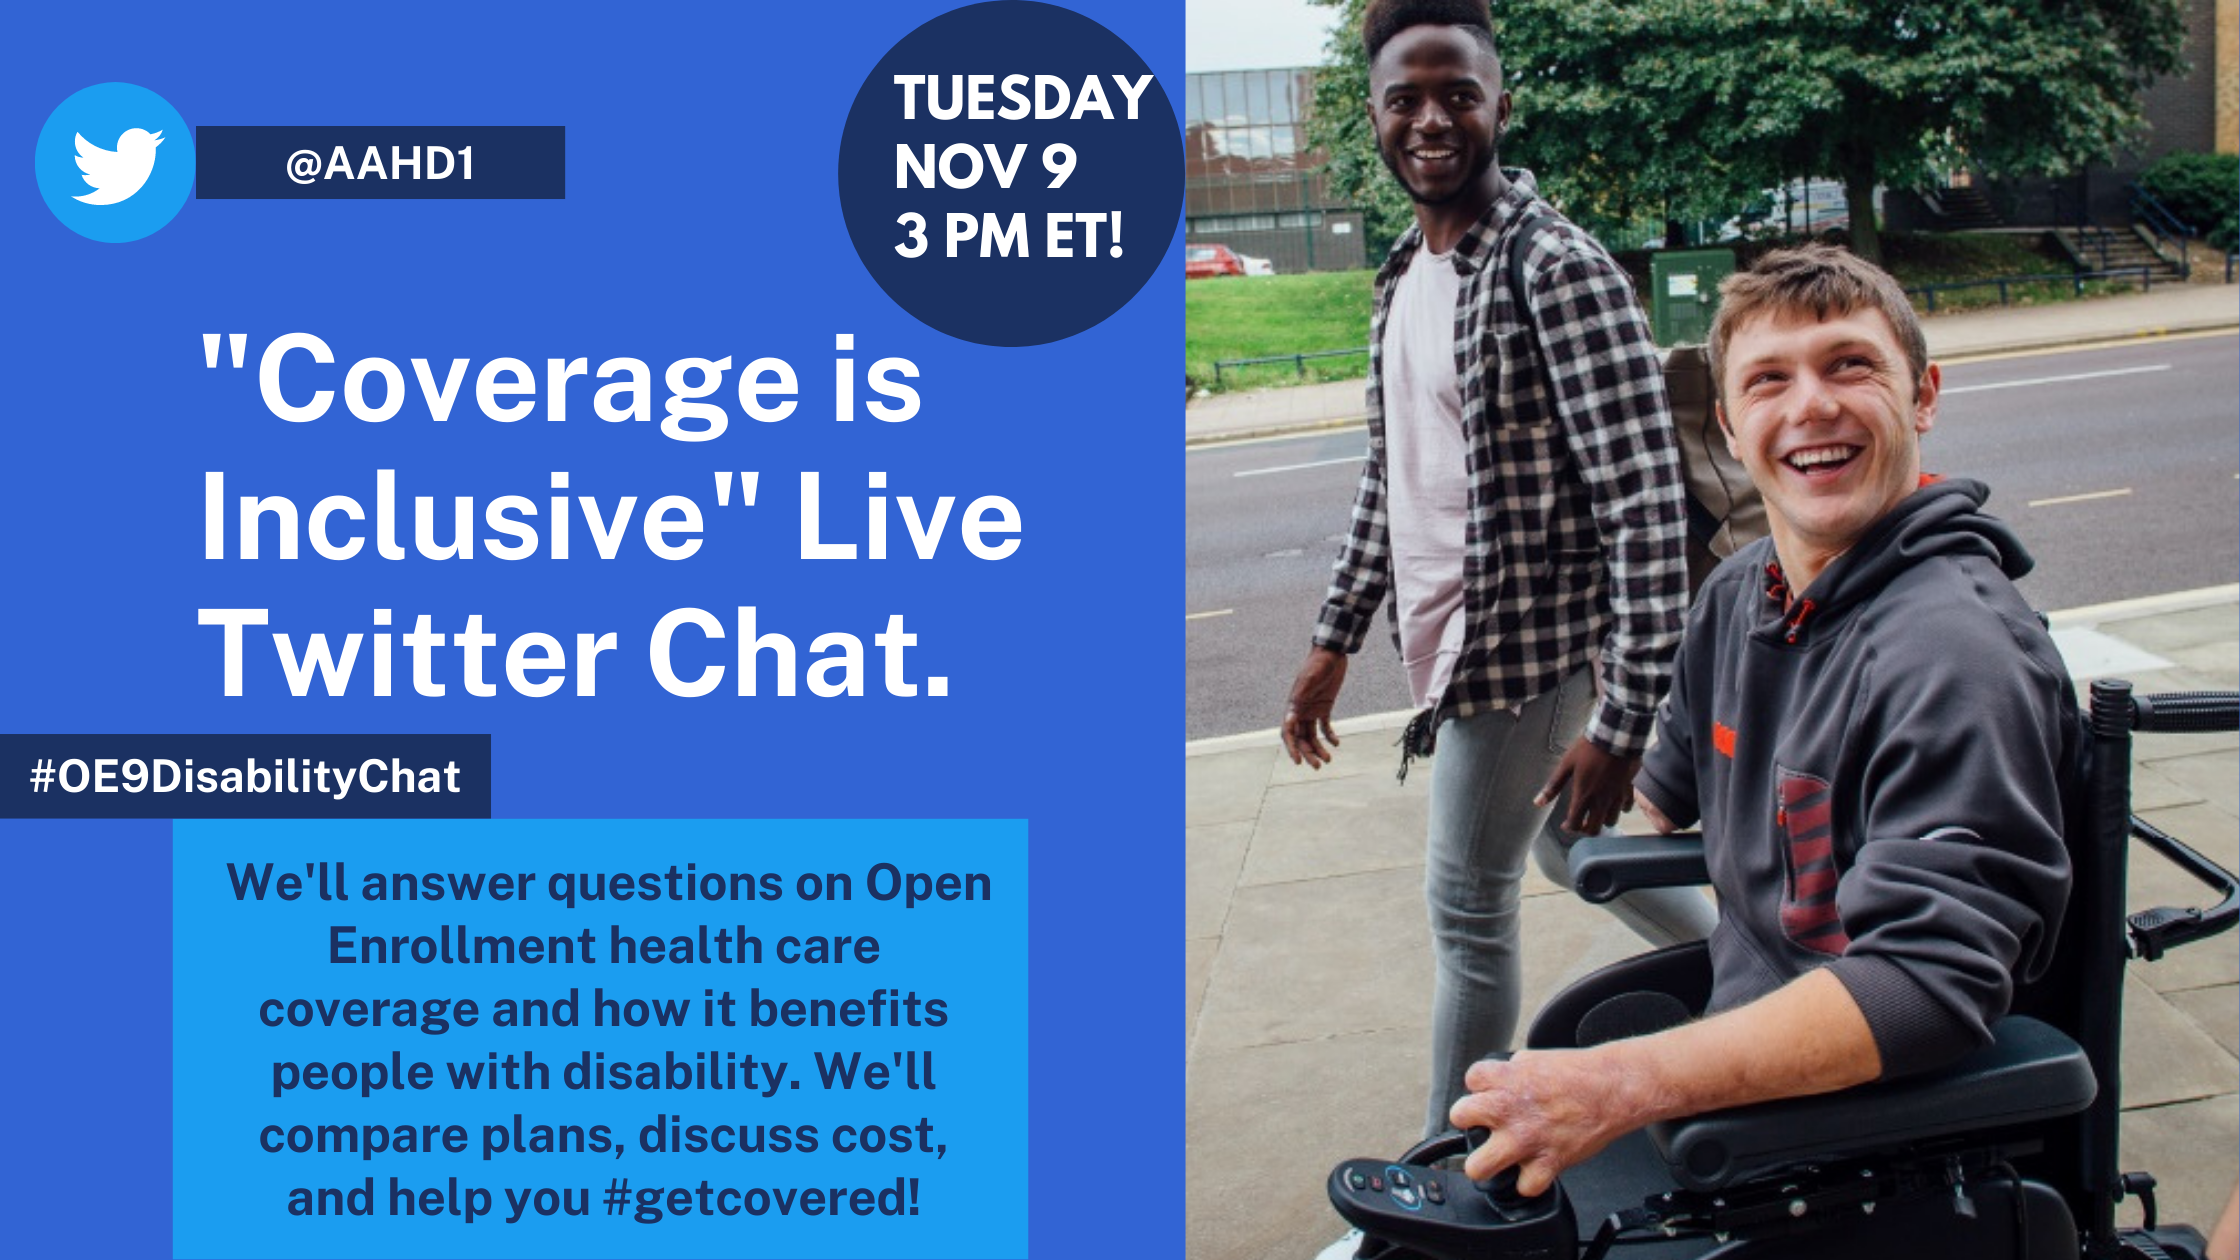 Graphic with information on twitter chat on November 9 at 3 PM ET with the AAHD Twitter handle @AAHD1 and hashtag #OE9DisabilityChat. Also includes a photo of two young men smiling, one in a wheelchair and the other walking beside him.